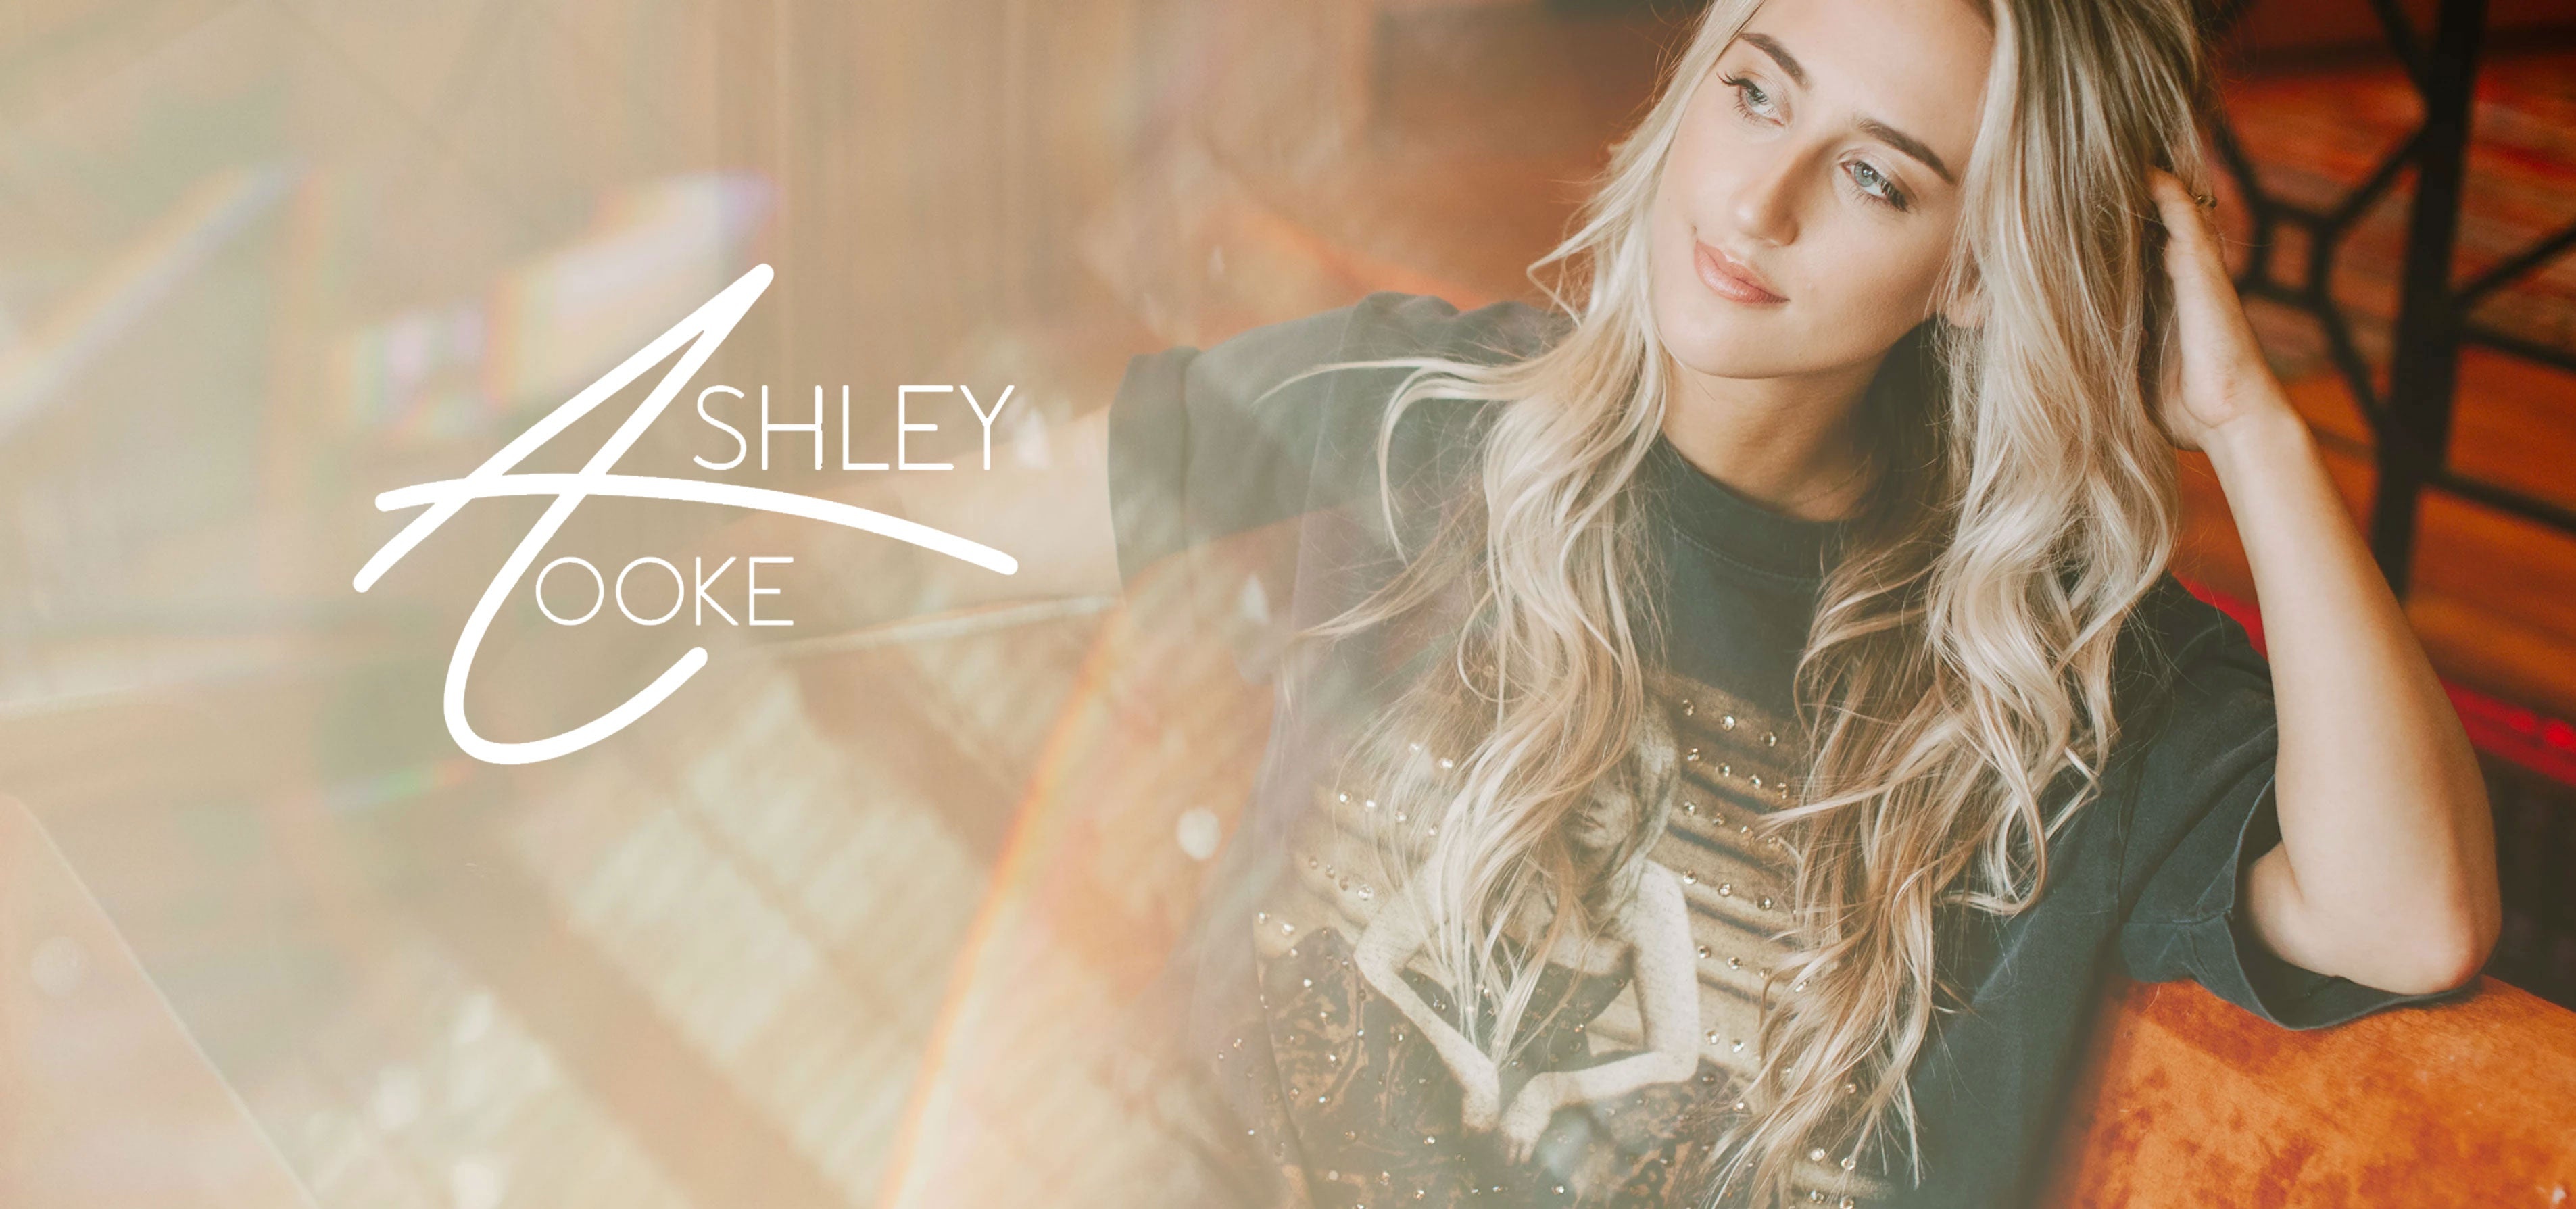 Ashley Cooke, Official store, Merchandise, Exclusive products, 3820x1790 Dual Screen Desktop